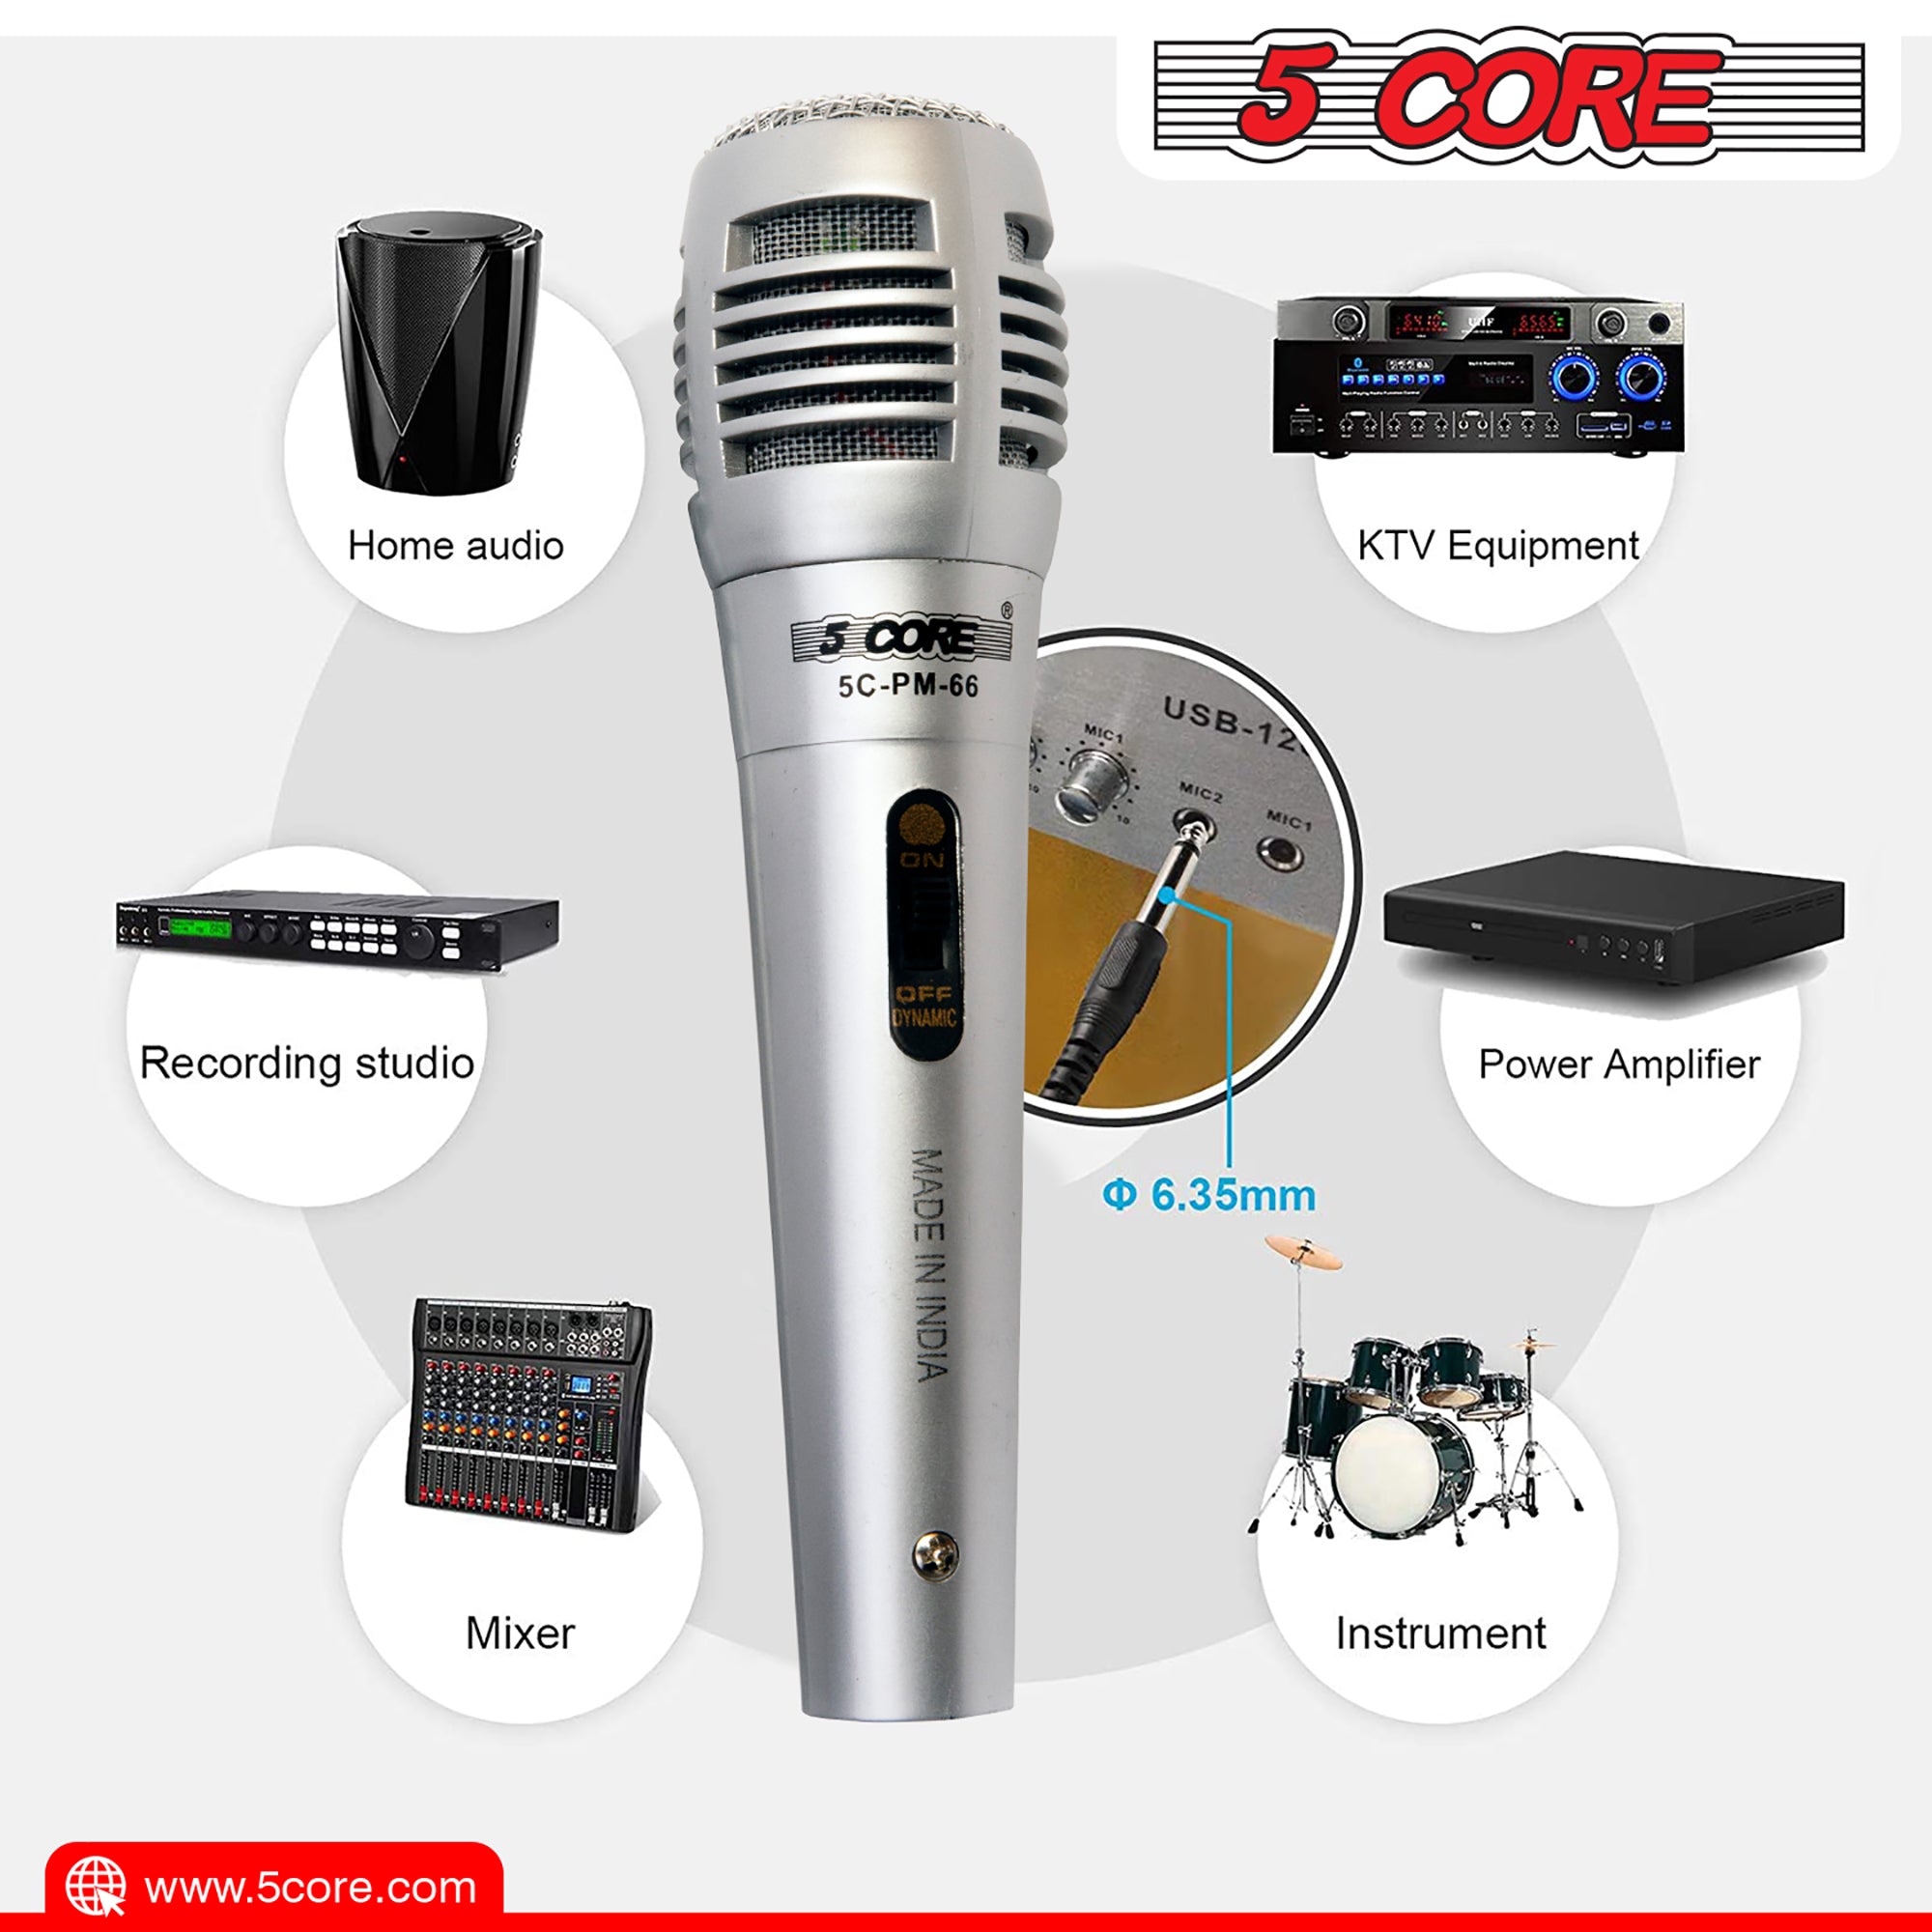 Boost Your Performance: PM-66K Microphones Ensure Quality Sound